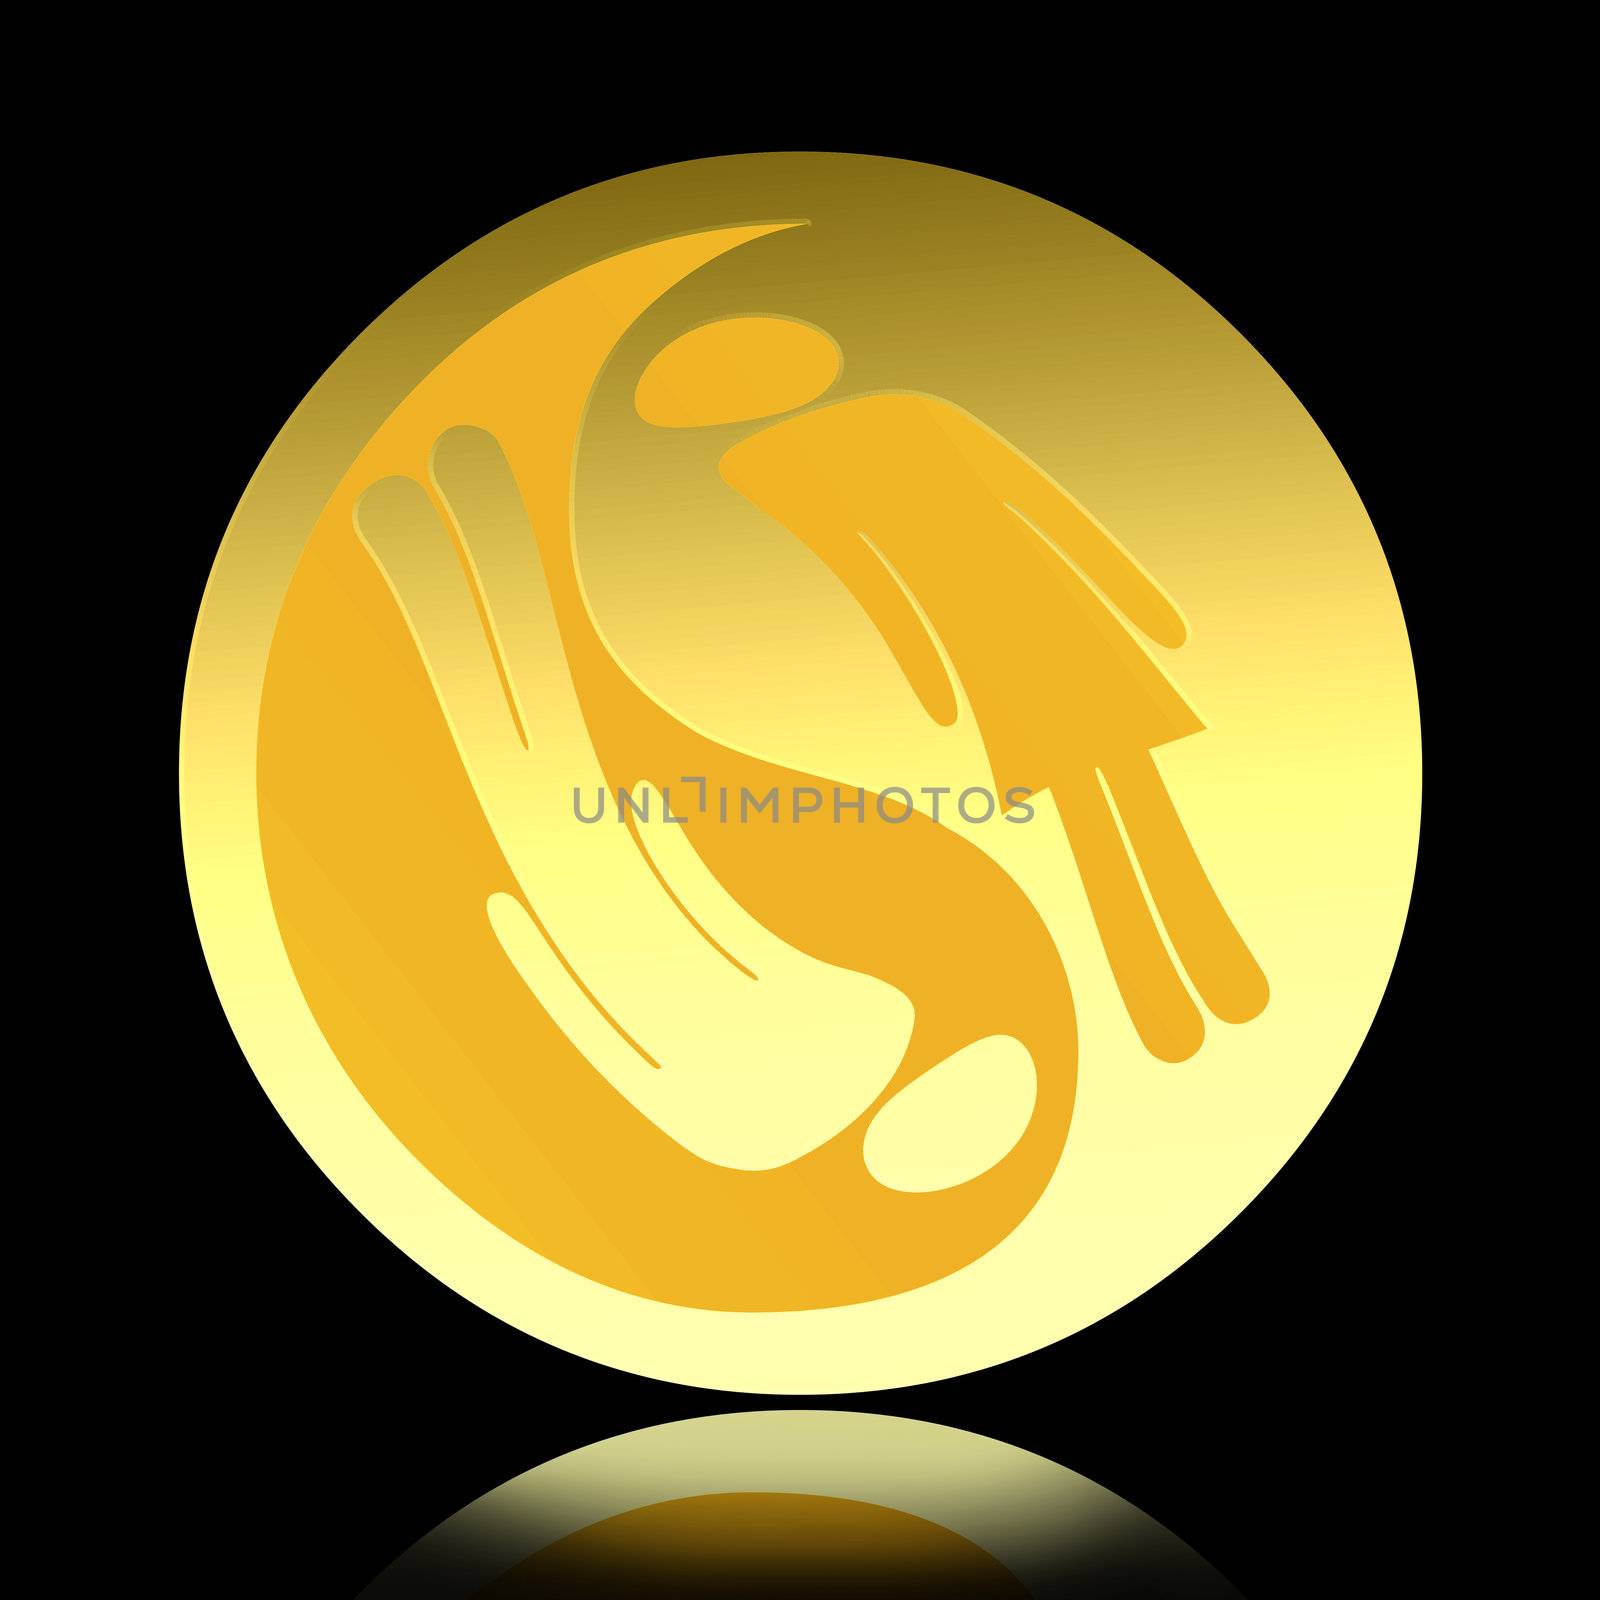 Golden Yin Yang symbol with man and woman inside over black backgound